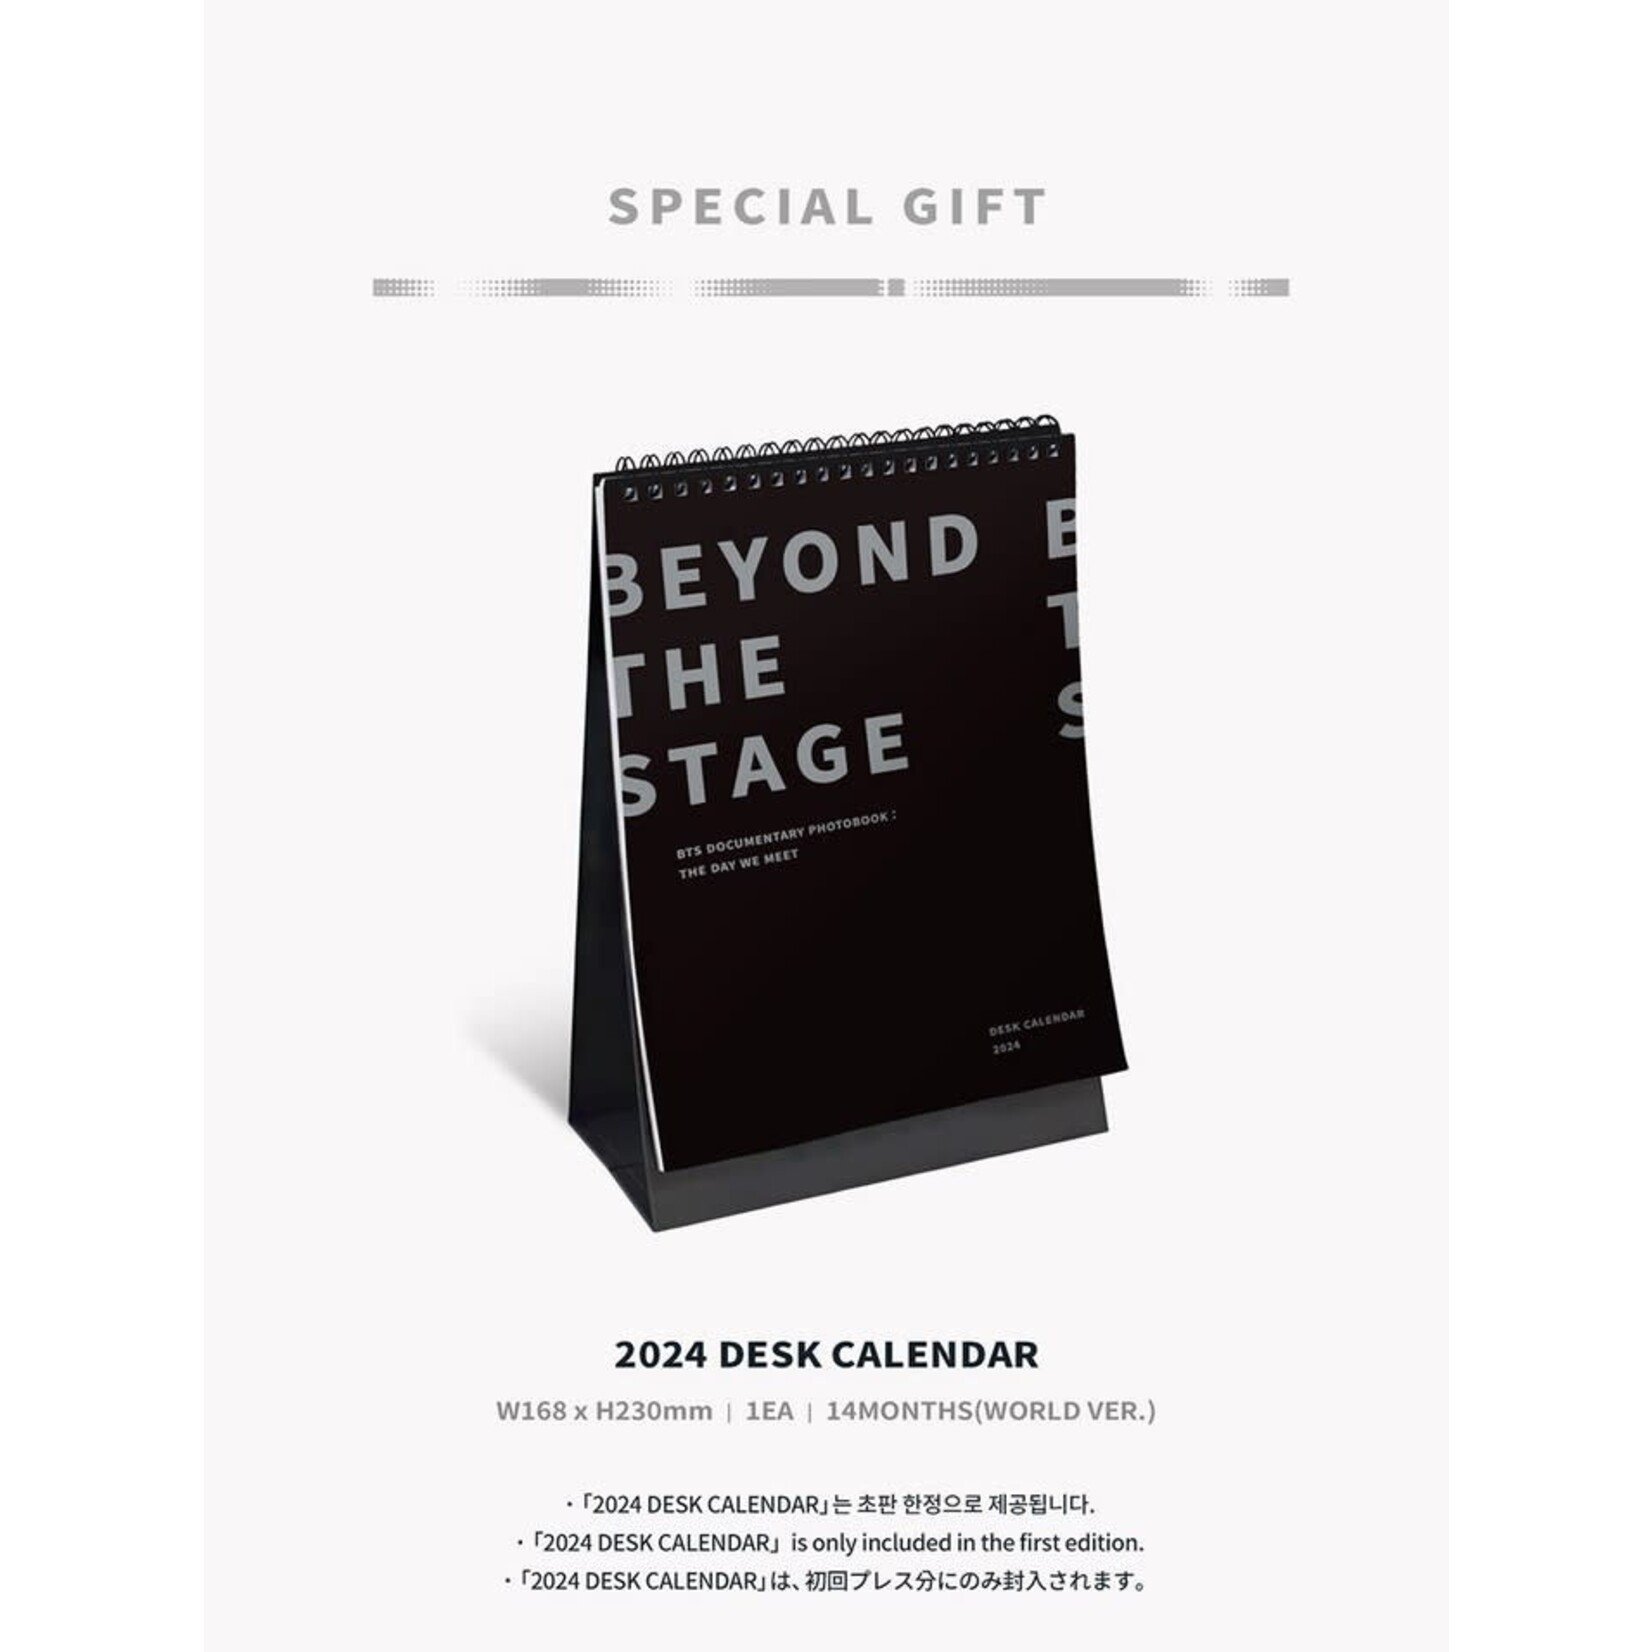 BTS BTS - [SPEICAL EVENT] ‘BEYOND THE STAGE’ BTS DOCUMENTARY PHOTOBOOK : THE DAY WE MEET + Weverse Gift (WS)